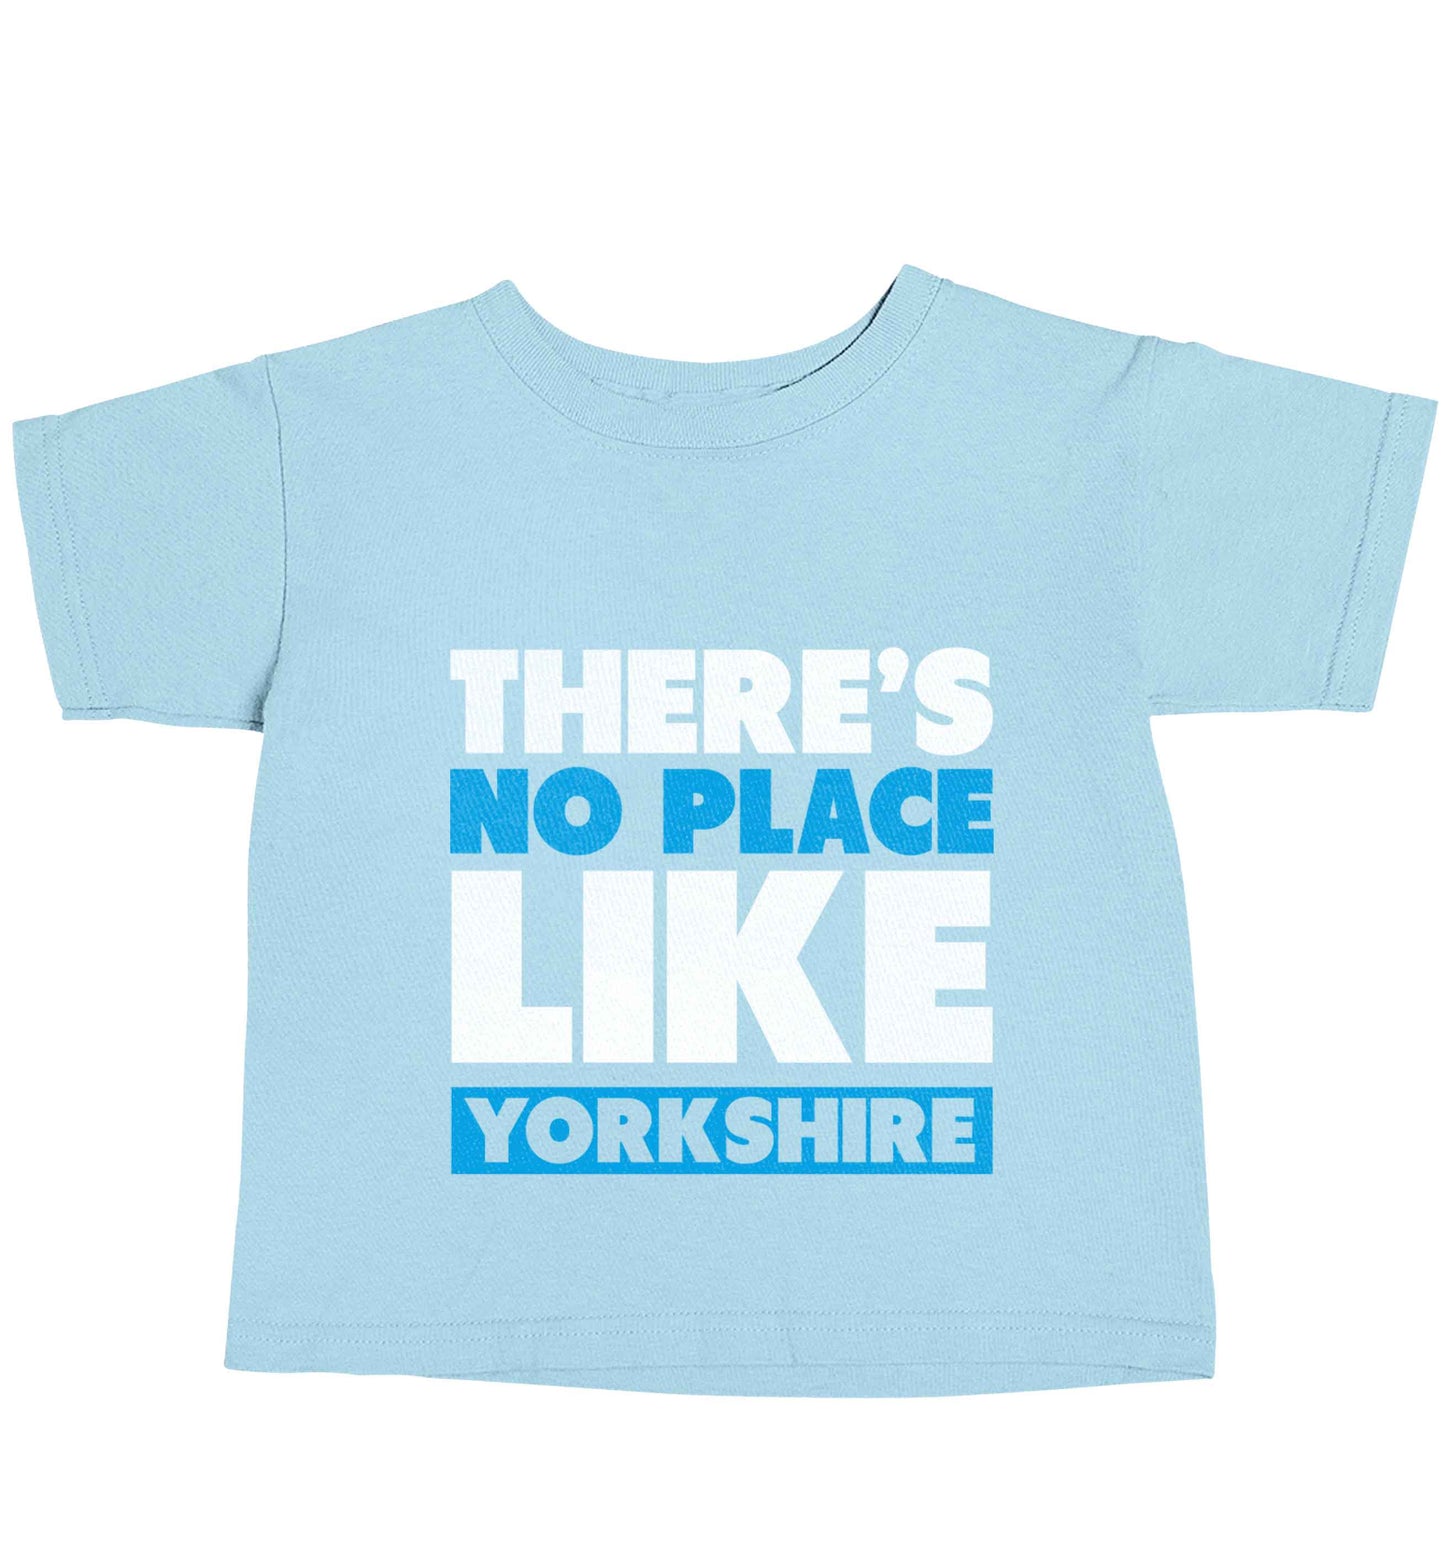 There's no place like Yorkshire light blue baby toddler Tshirt 2 Years